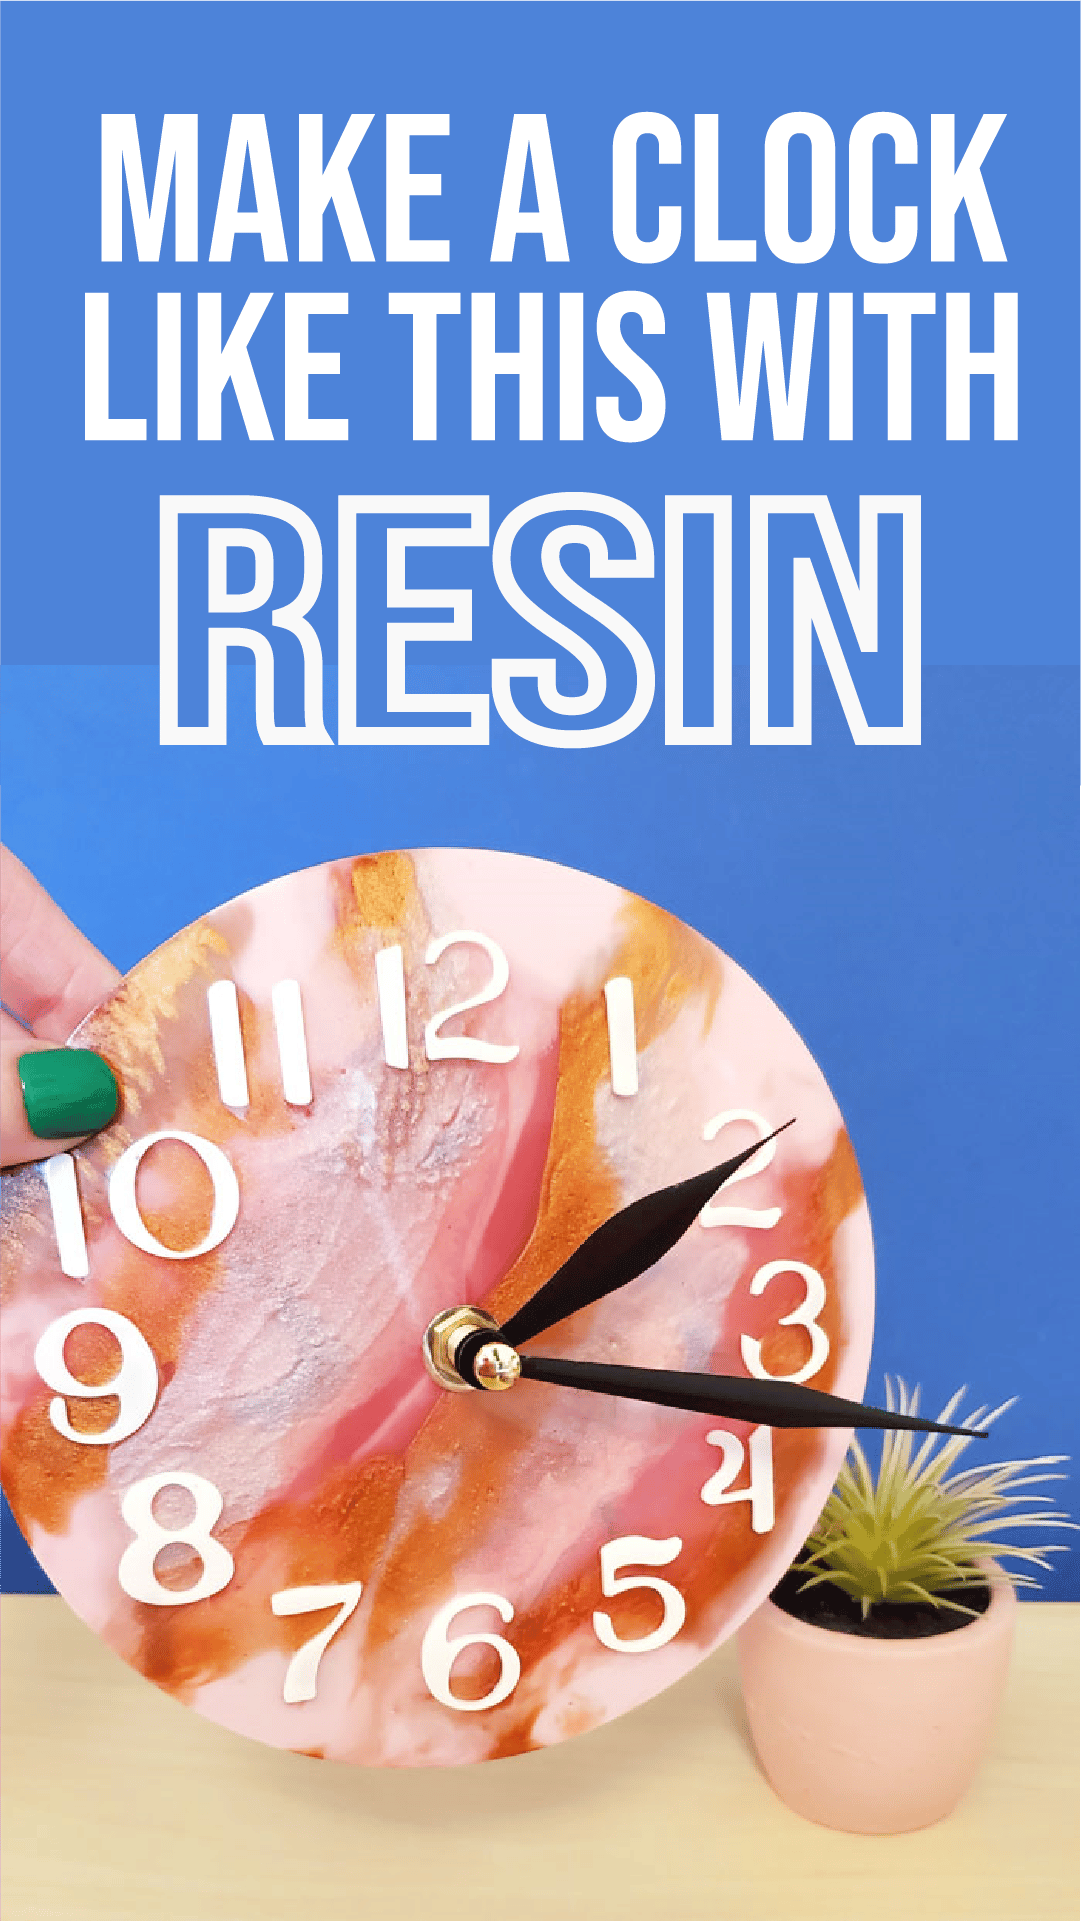 Learn how to use a resin clock mold to make a beautiful pink resin clock. Blend dyes and mica powder for variation. via @resincraftsblog